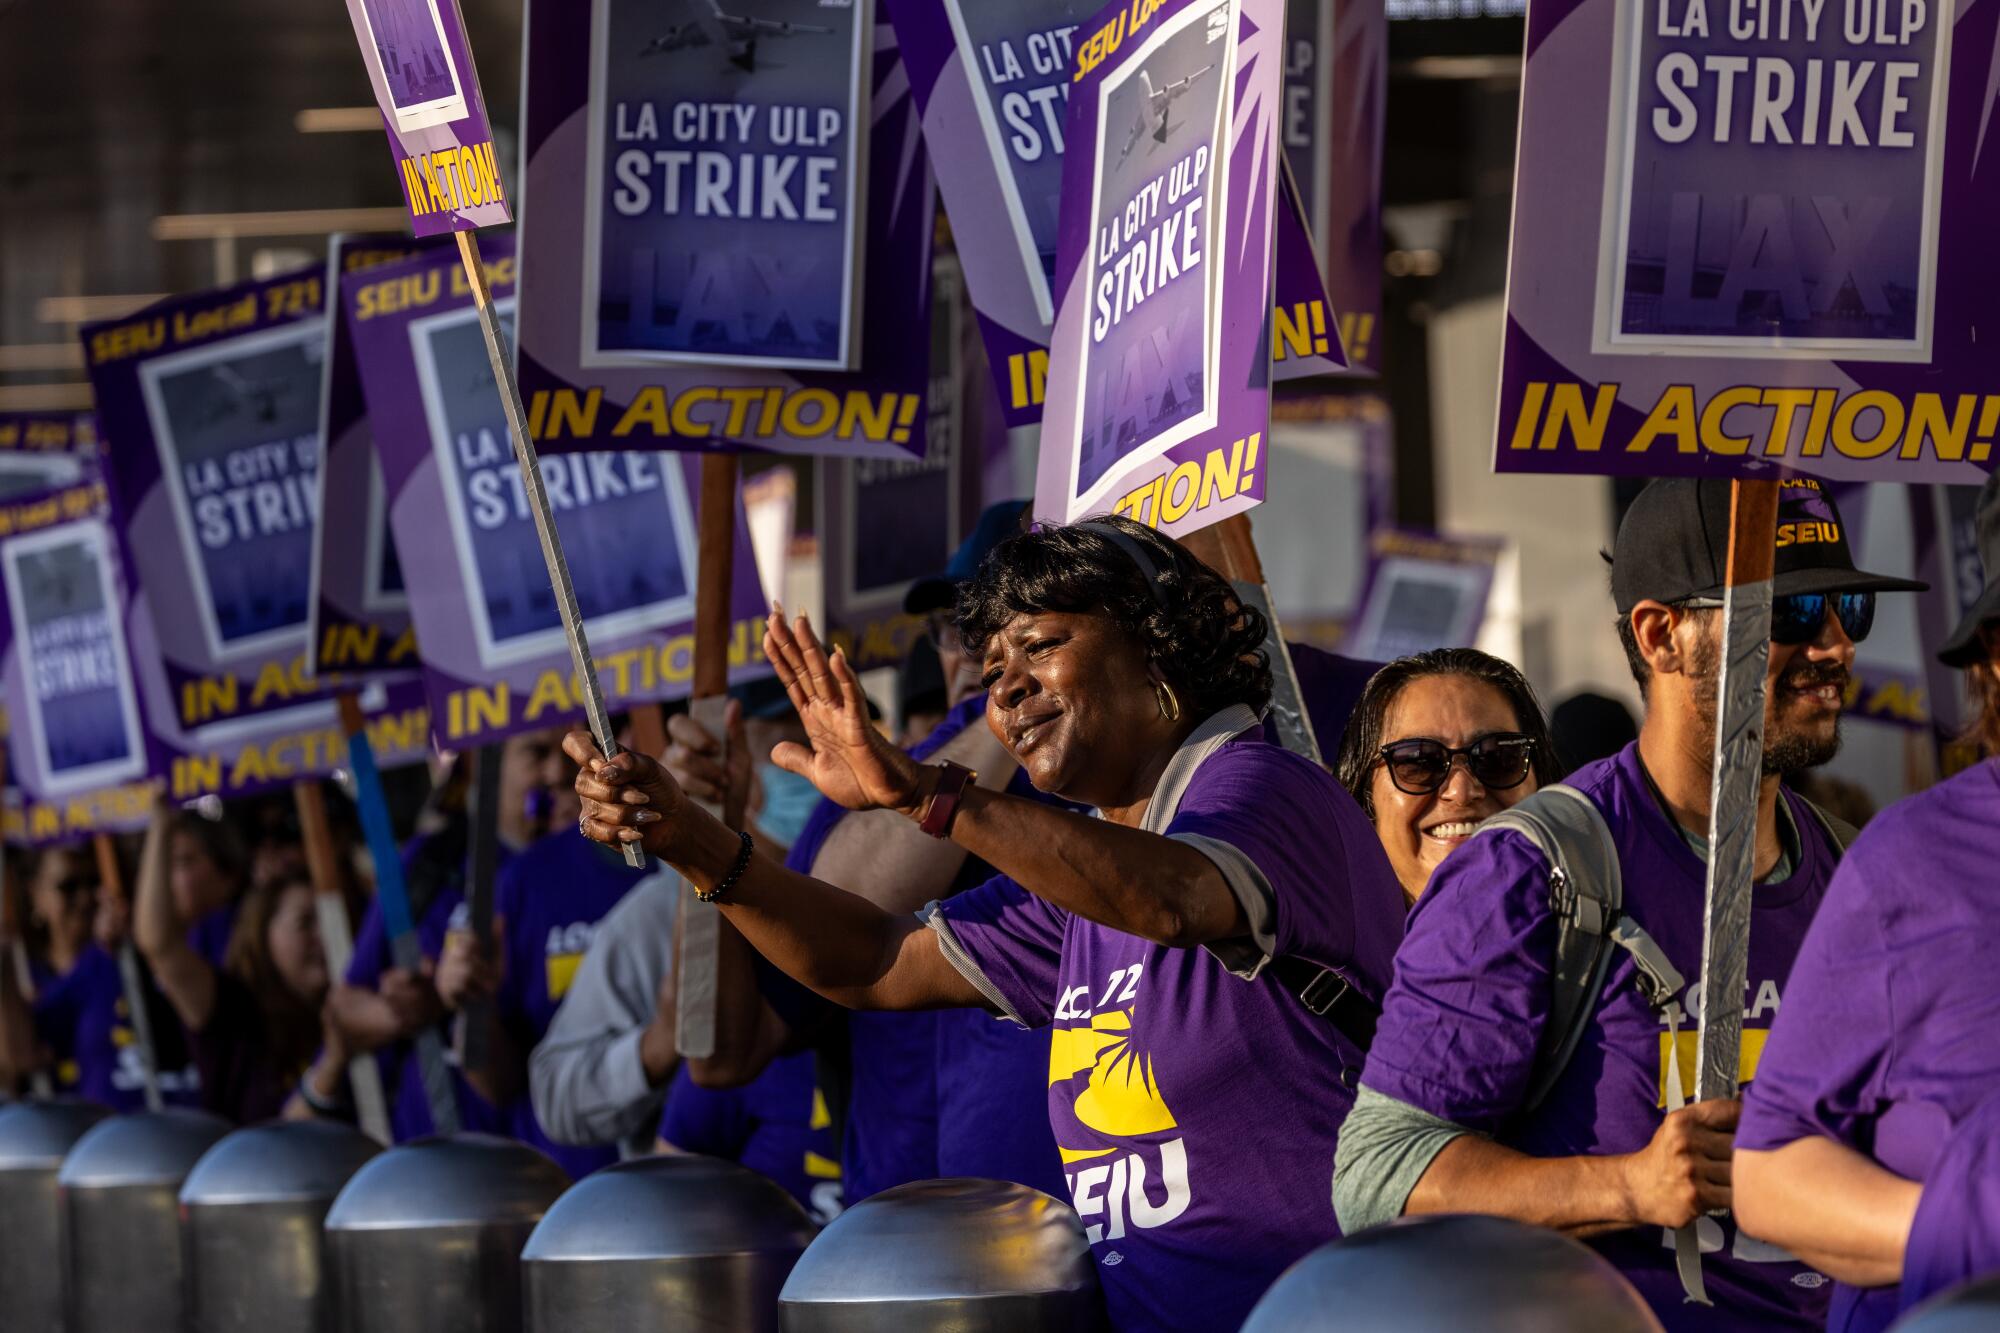 A woman urges motorists to honk during a strike by Los Angeles city workers.